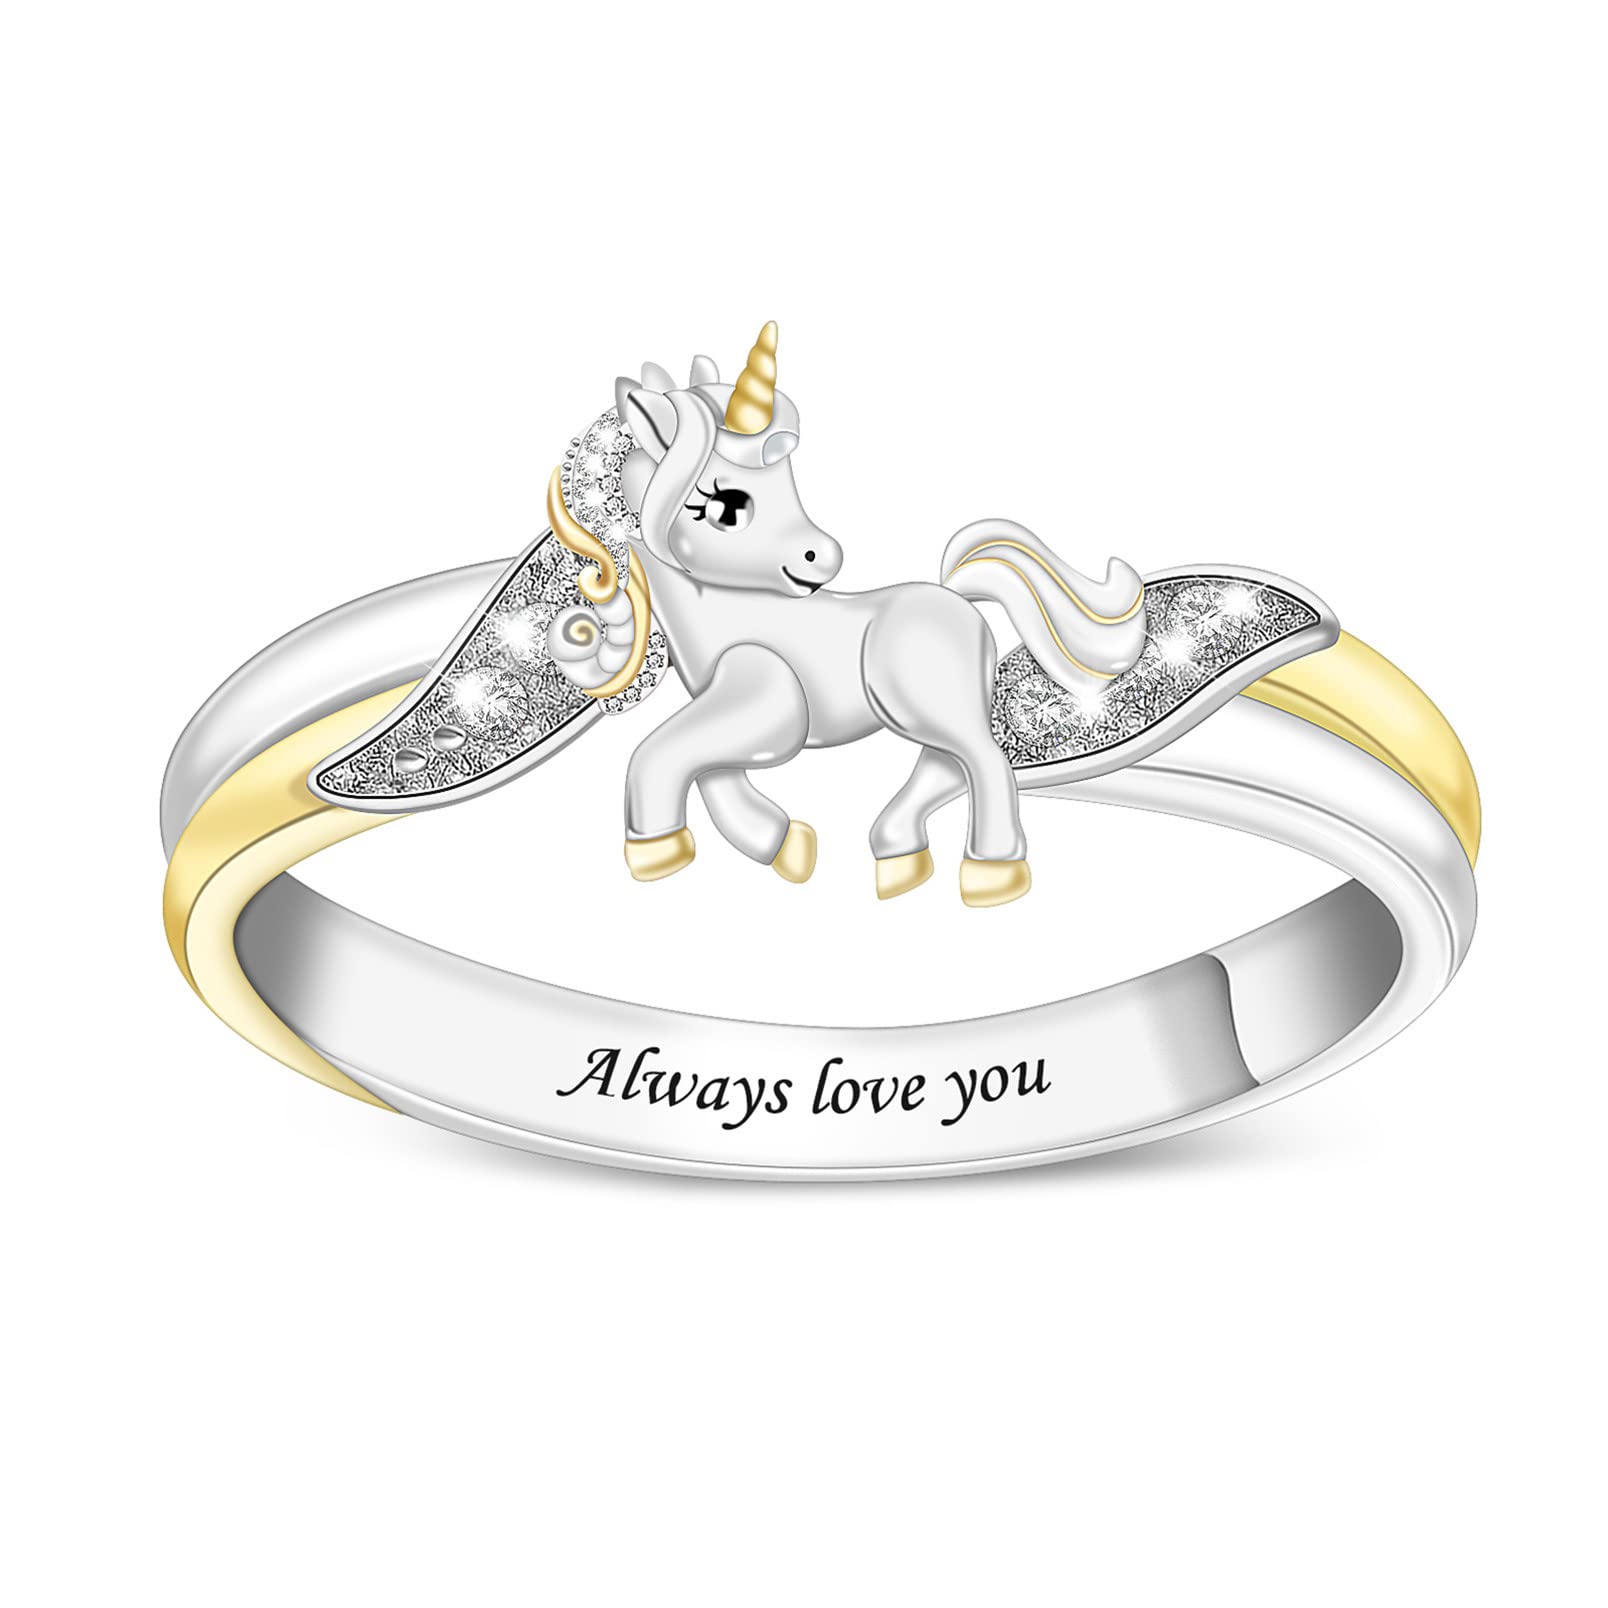 Personalized Unicorn Shaped Ring and Free Engraving.